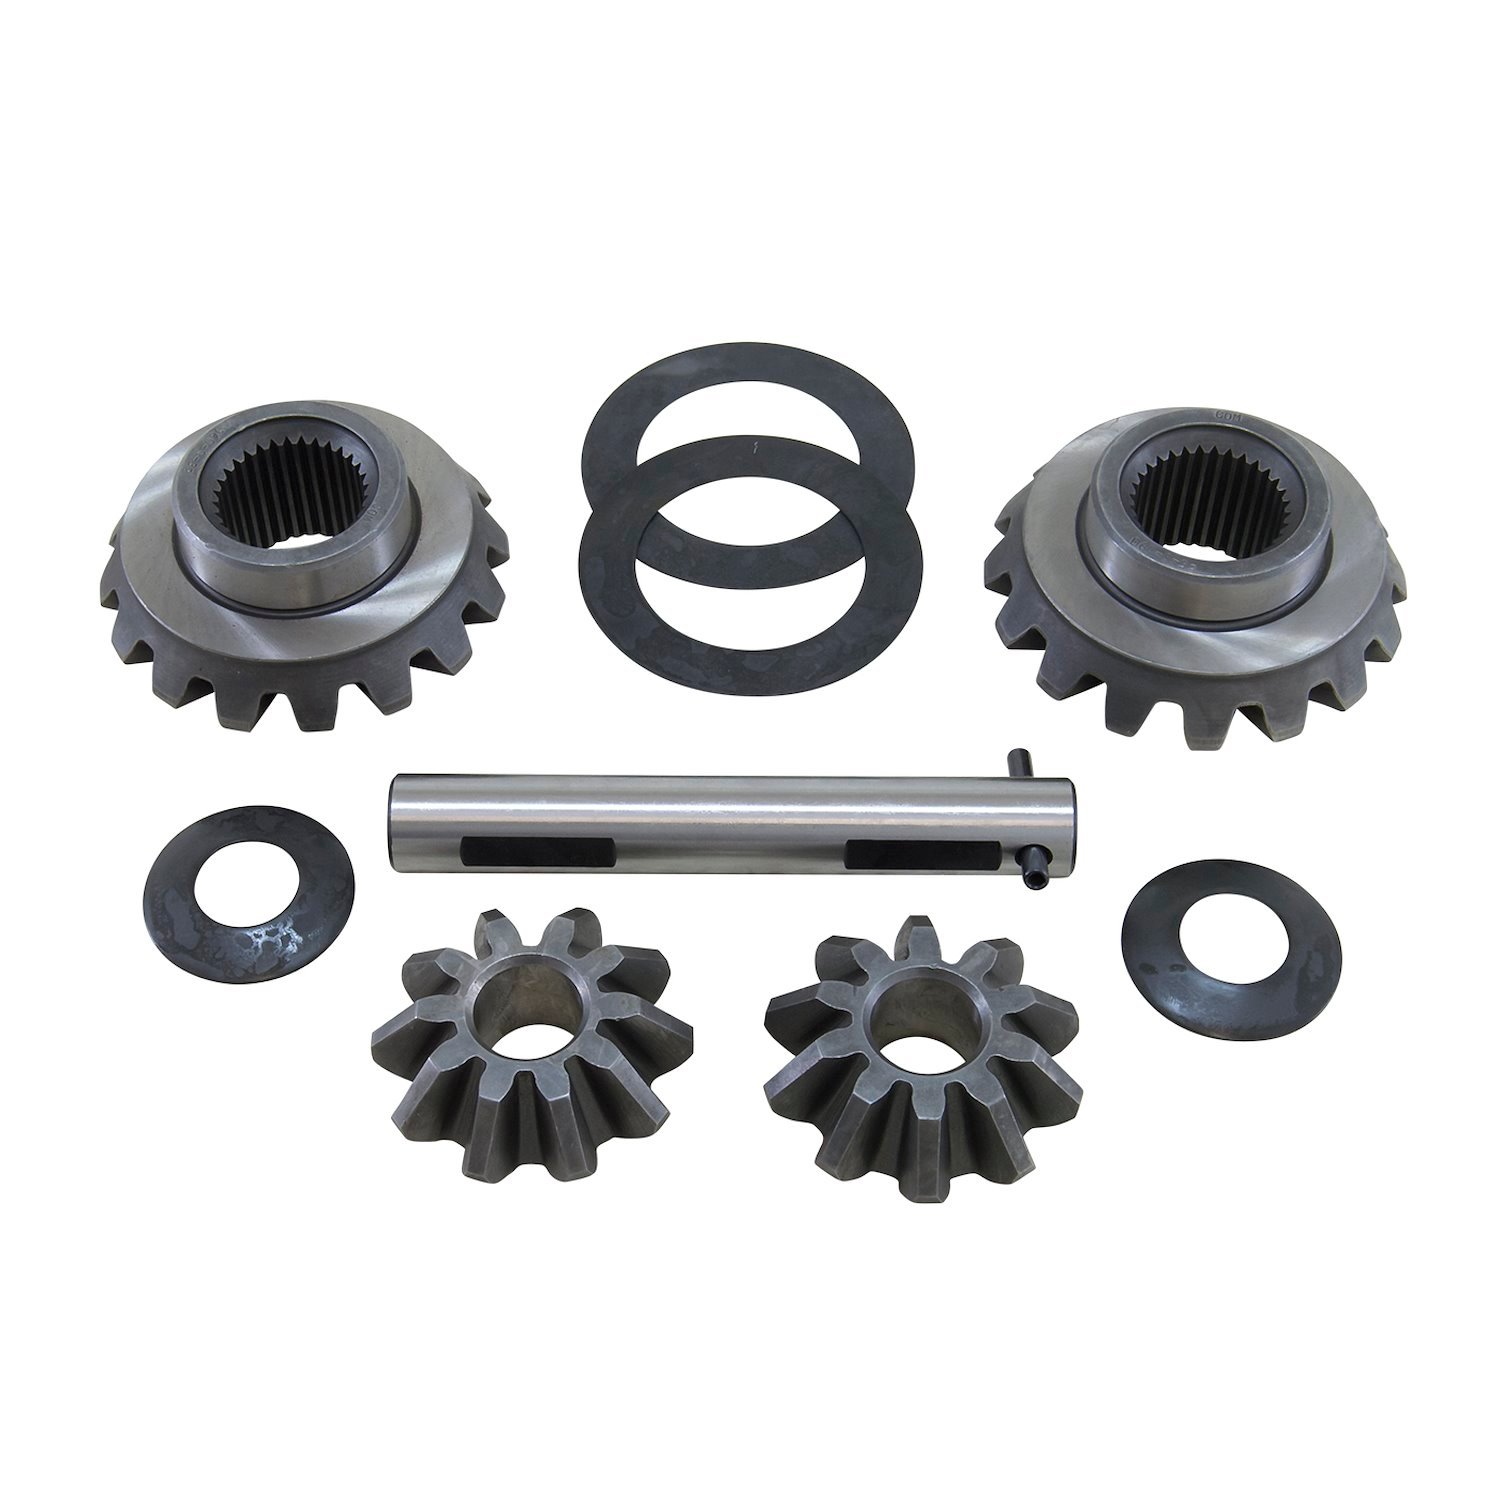 Replacement Standard Open Spider Gear Kit For Dana